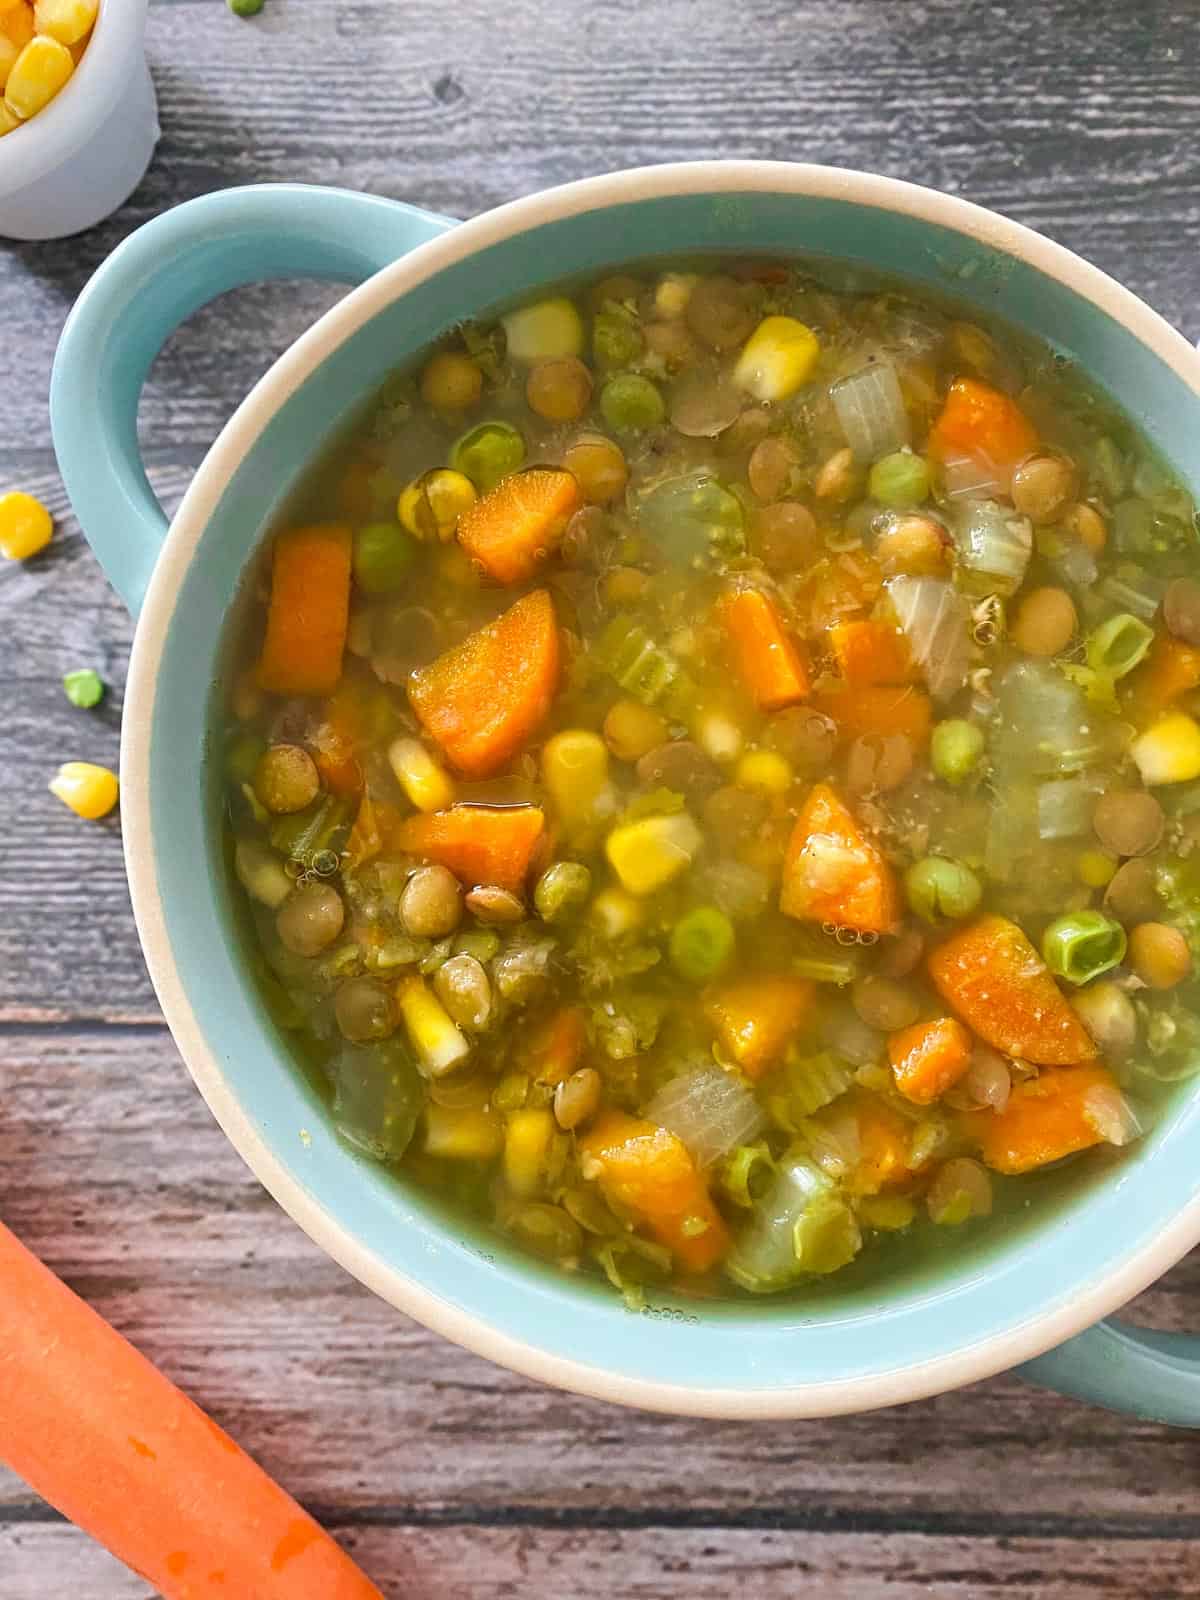 Blue bowl of soup with lentils, peas, carrots, onion, celery and broth.